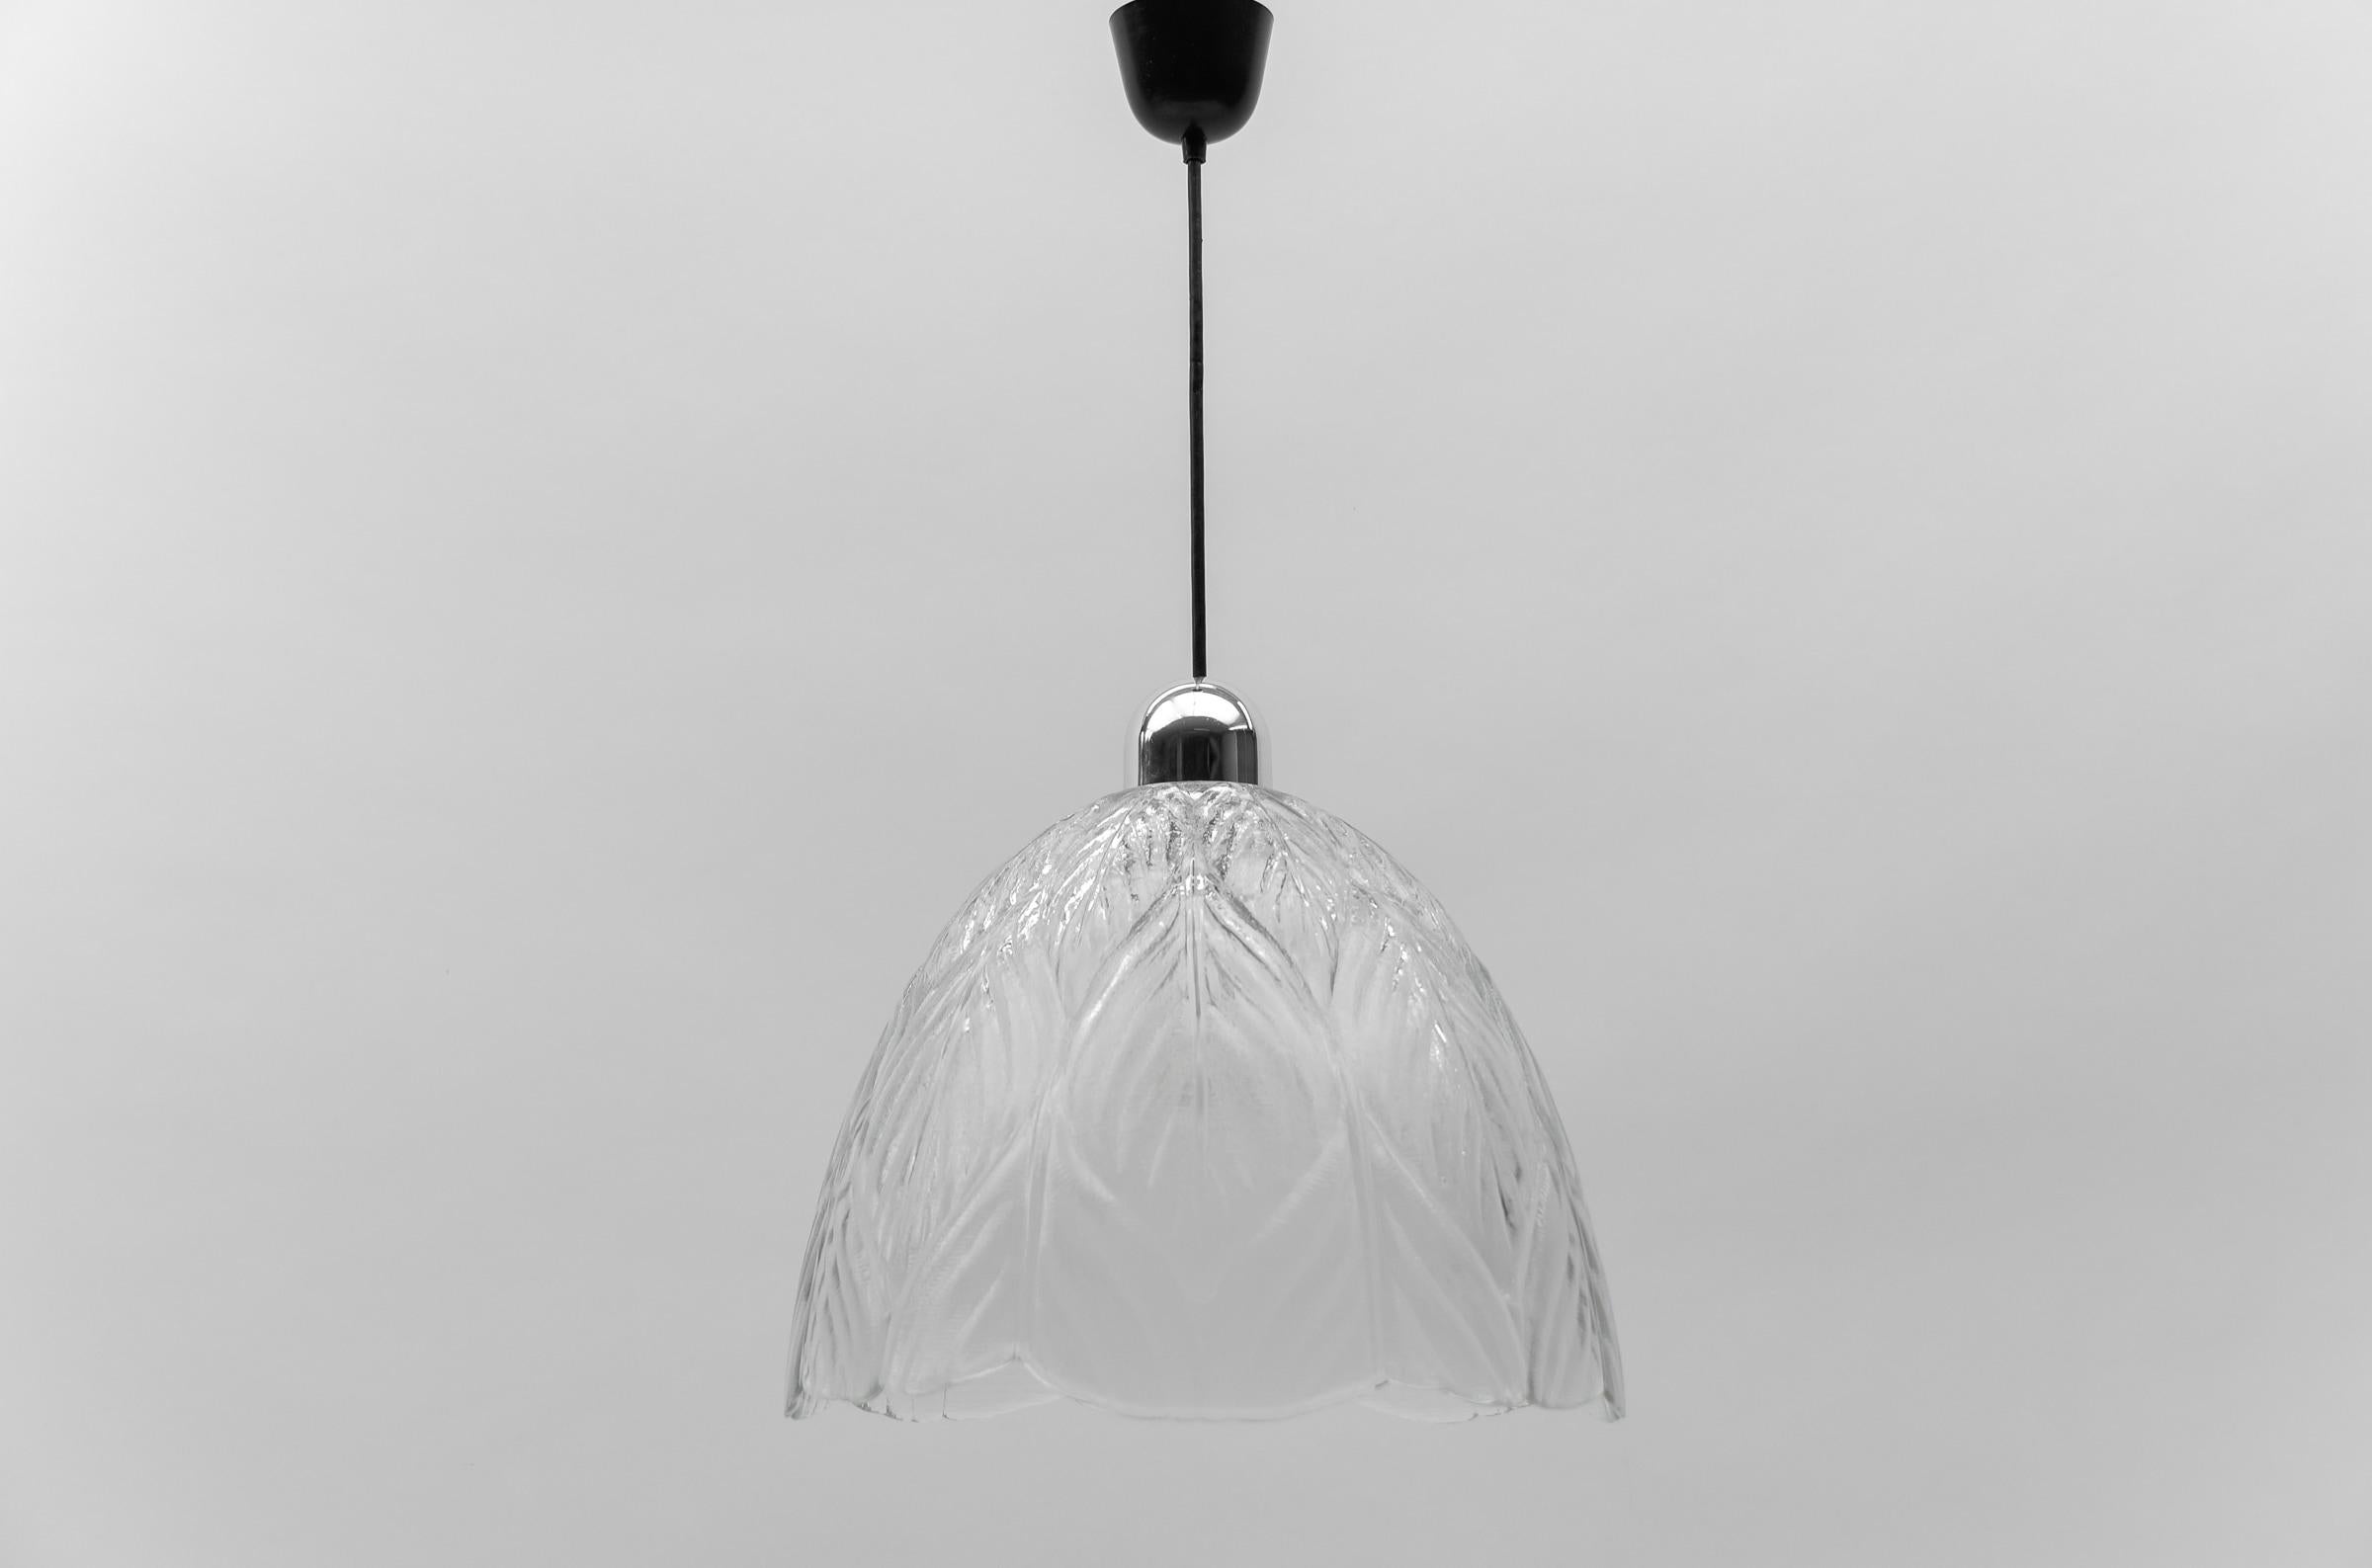 Lovely Leaf Shape Glass Ceiling Lamp by Peill & Putzler, 1960s

The lamp need 1x E27 / E26 Edison screw fit bulb, is wired, in working condition and runs both on 110 / 230 volt.

Light bulbs are not included.

It is possible to install this fixture